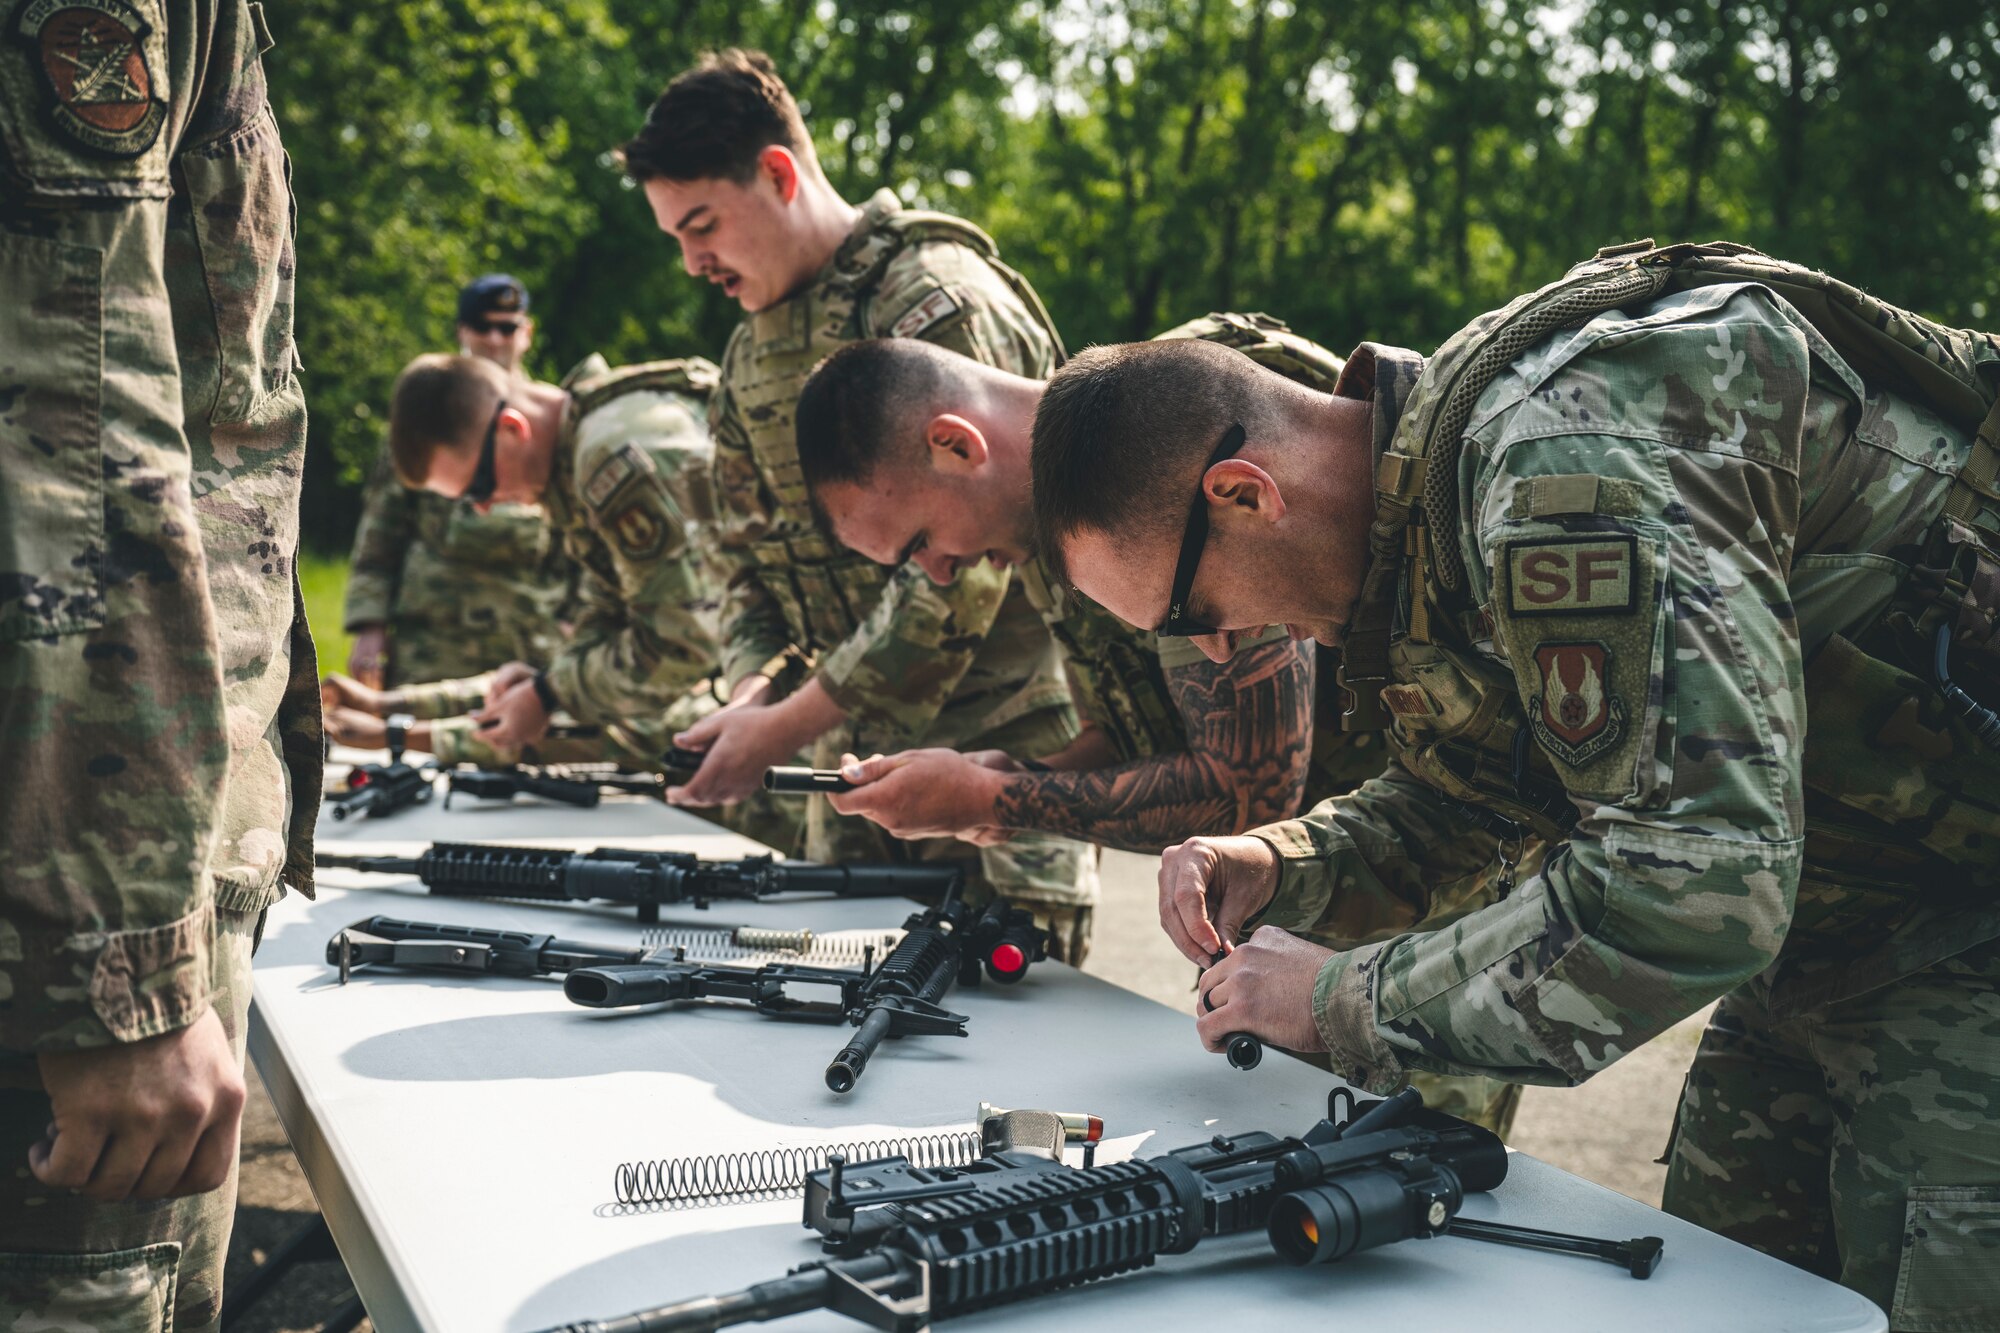 Airmen assemble a weapon during the Defender Challenge